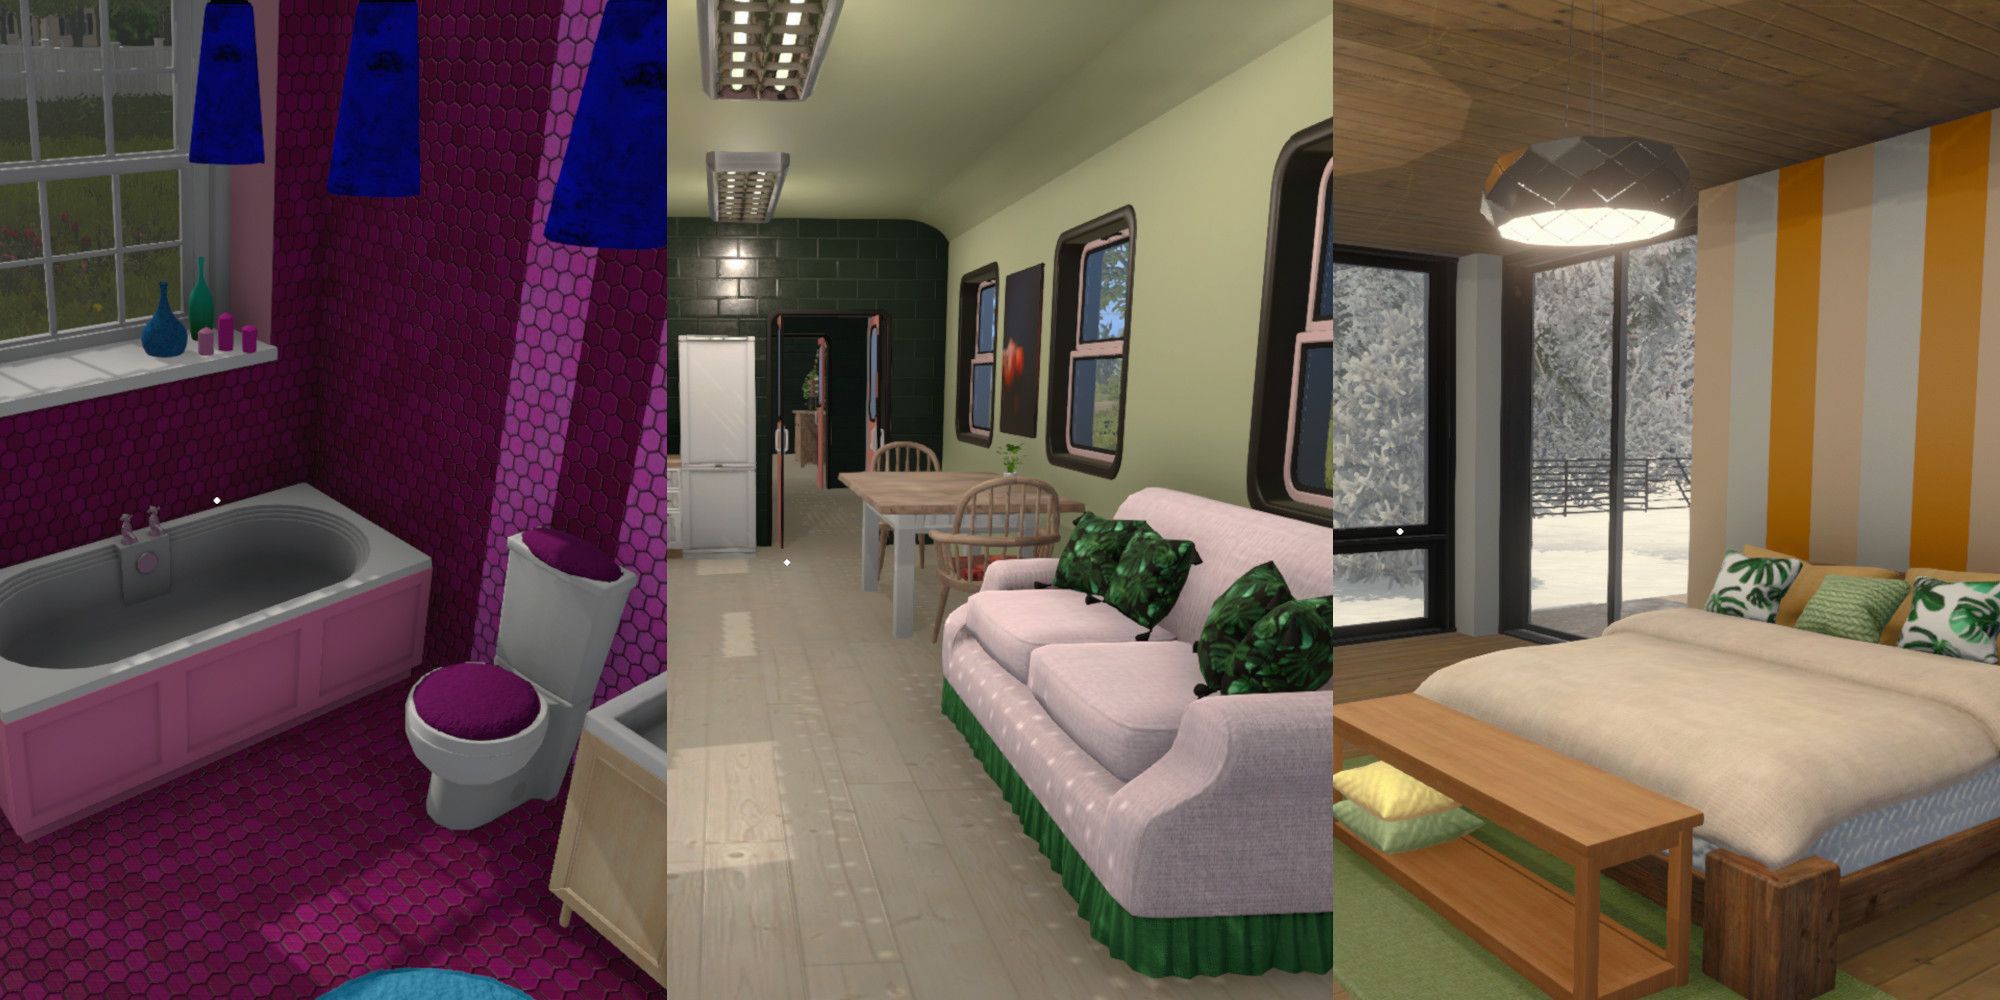 Photo collage of a bathroom, living room + kitchenette, and bedroom from House Flipper